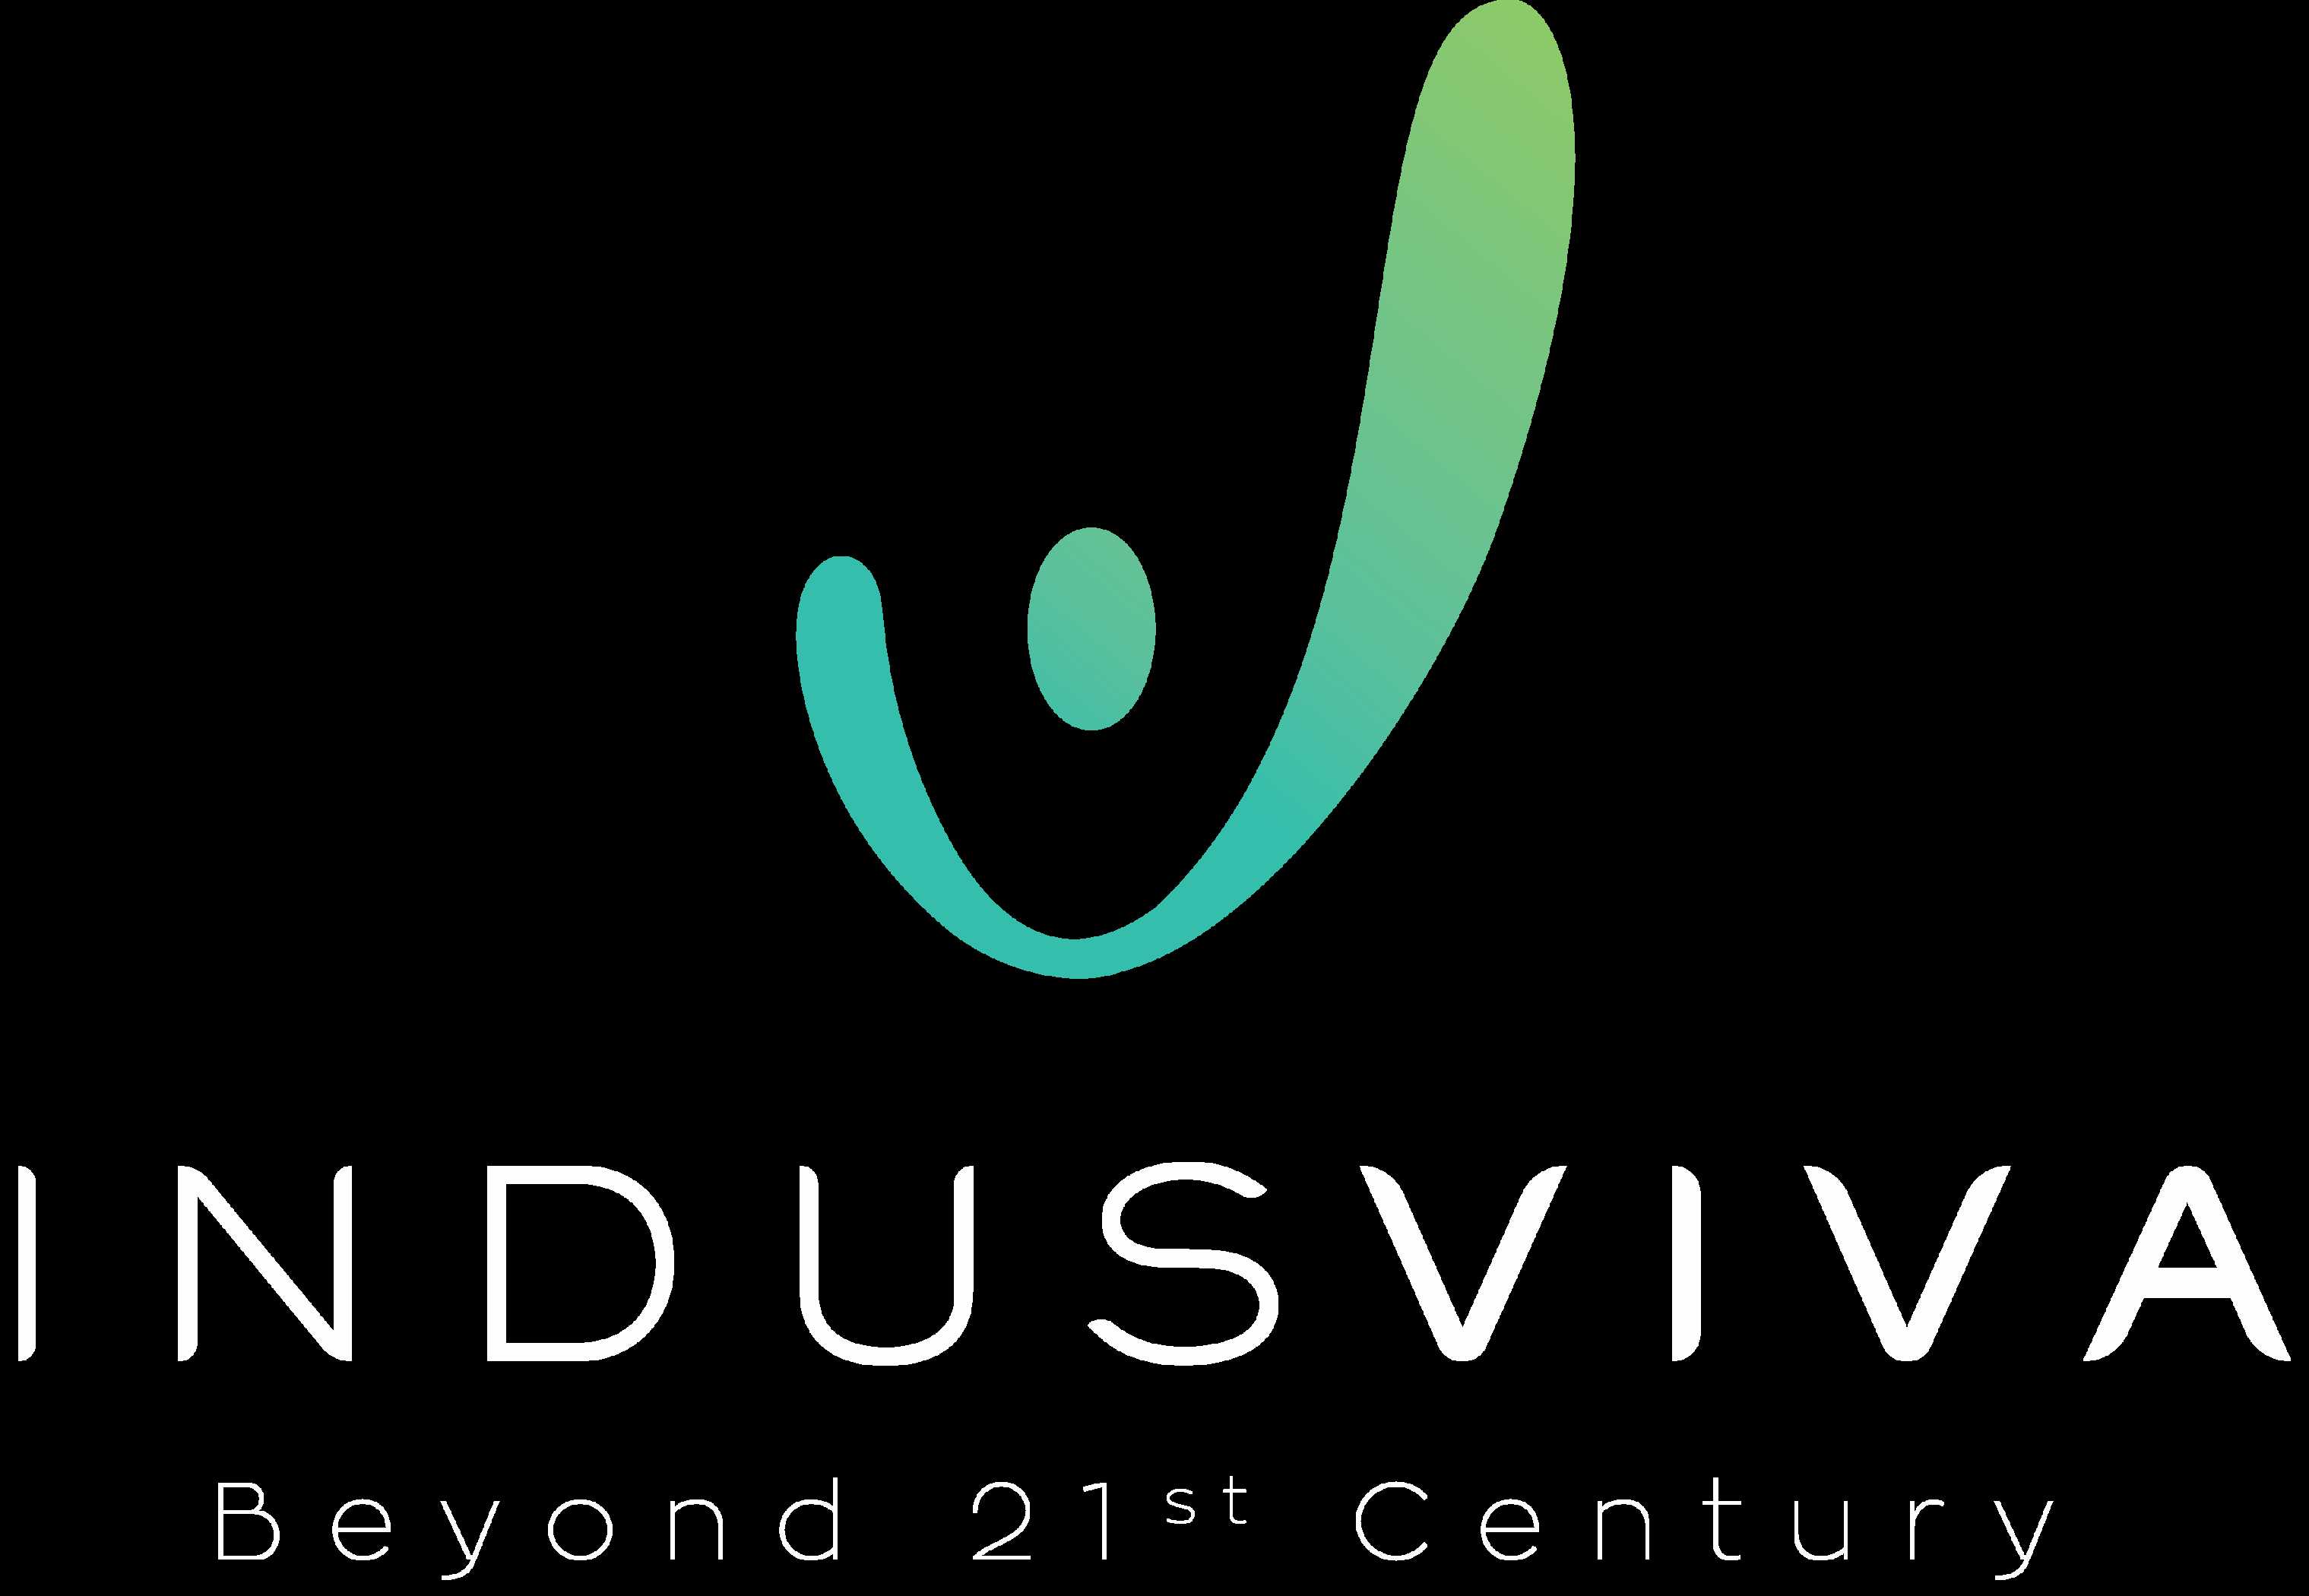 Our Technology - Indivus